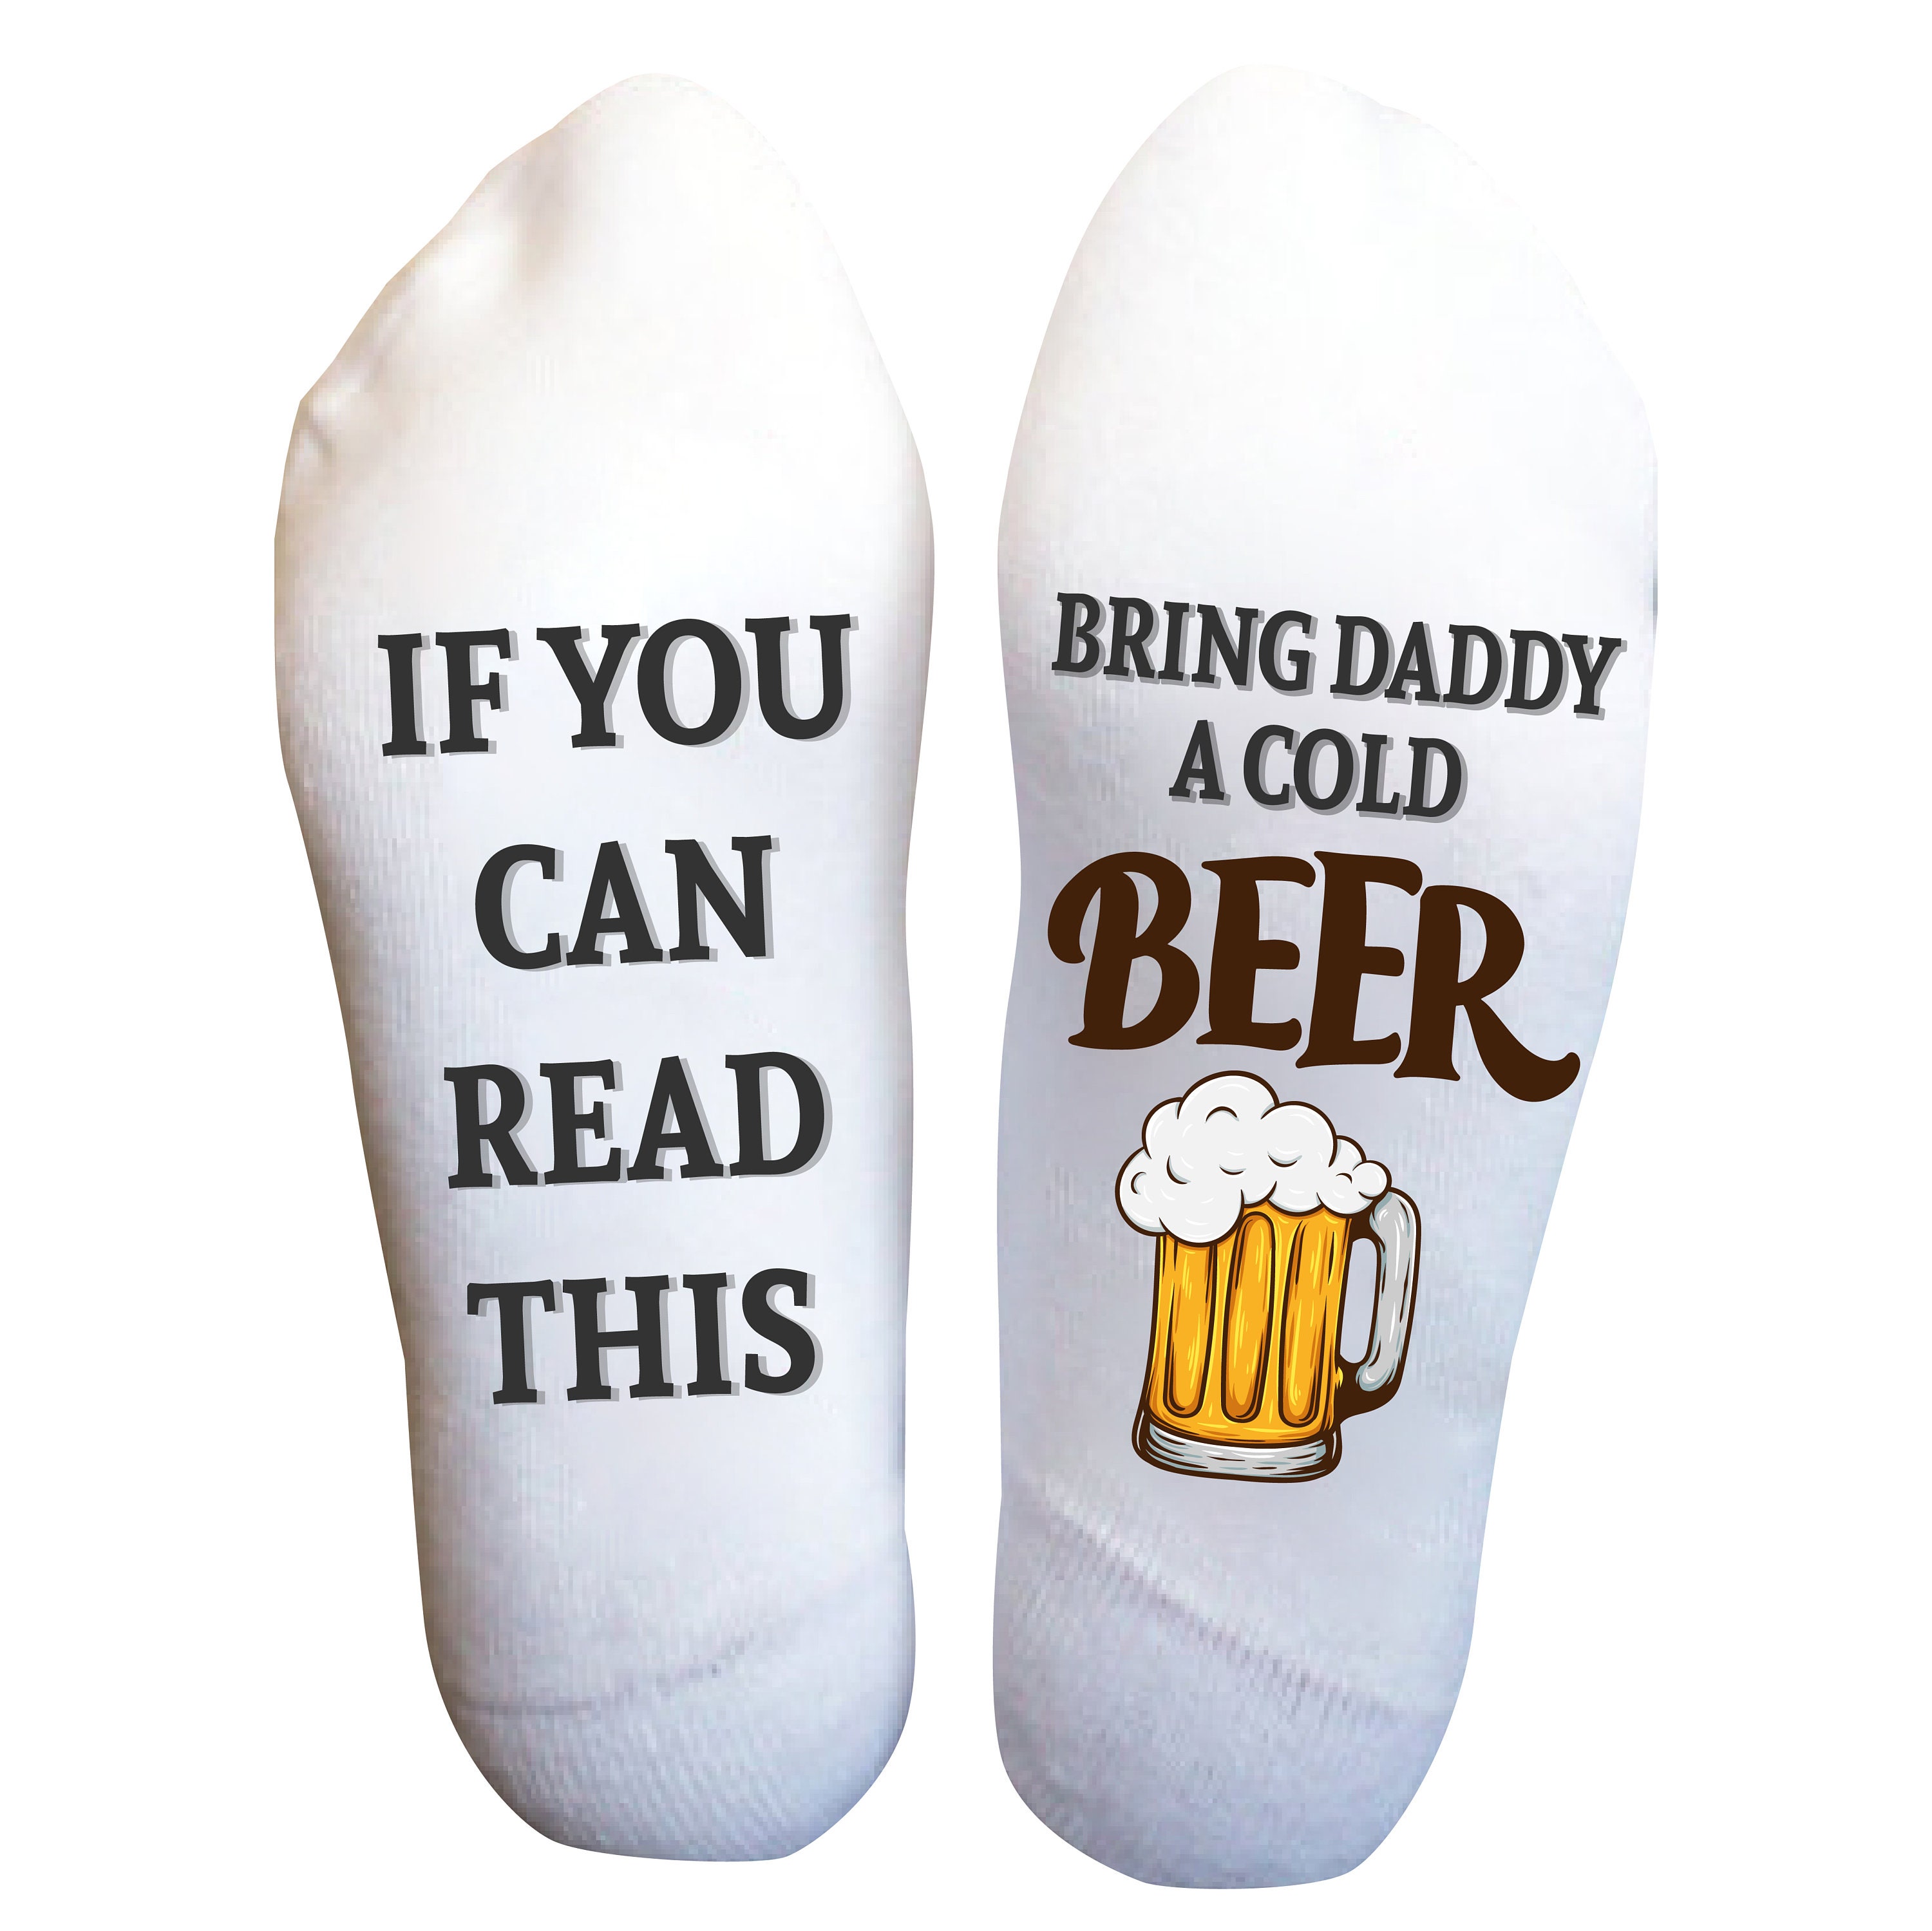 If You Can Read This Bring Me Beer Funny Socks Novelty Gifts for Men Women Christmas Gift Birthday Present 